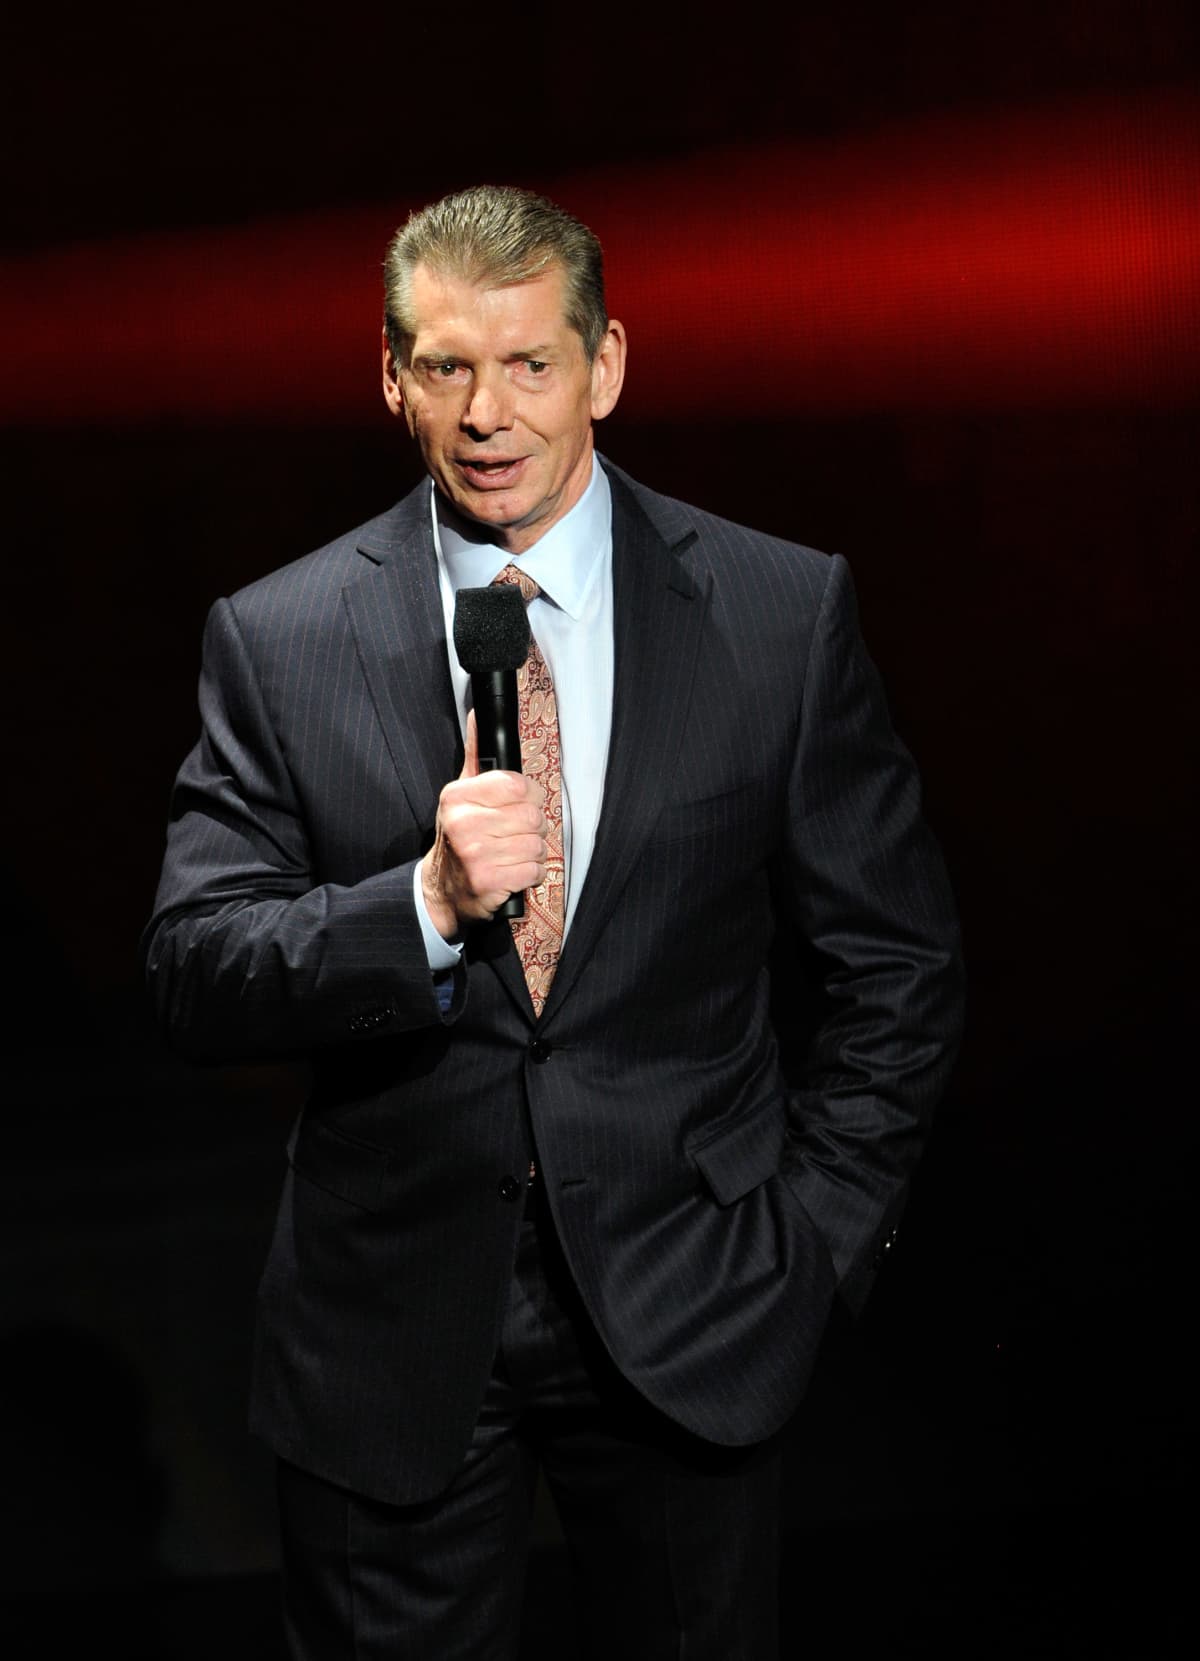 LAS VEGAS, NV - JANUARY 08:  WWE Chairman and CEO Vince McMahon speaks at a news conference announcing the WWE Network at the 2014 International CES at the Encore Theater at Wynn Las Vegas on January 8, 2014 in Las Vegas, Nevada.